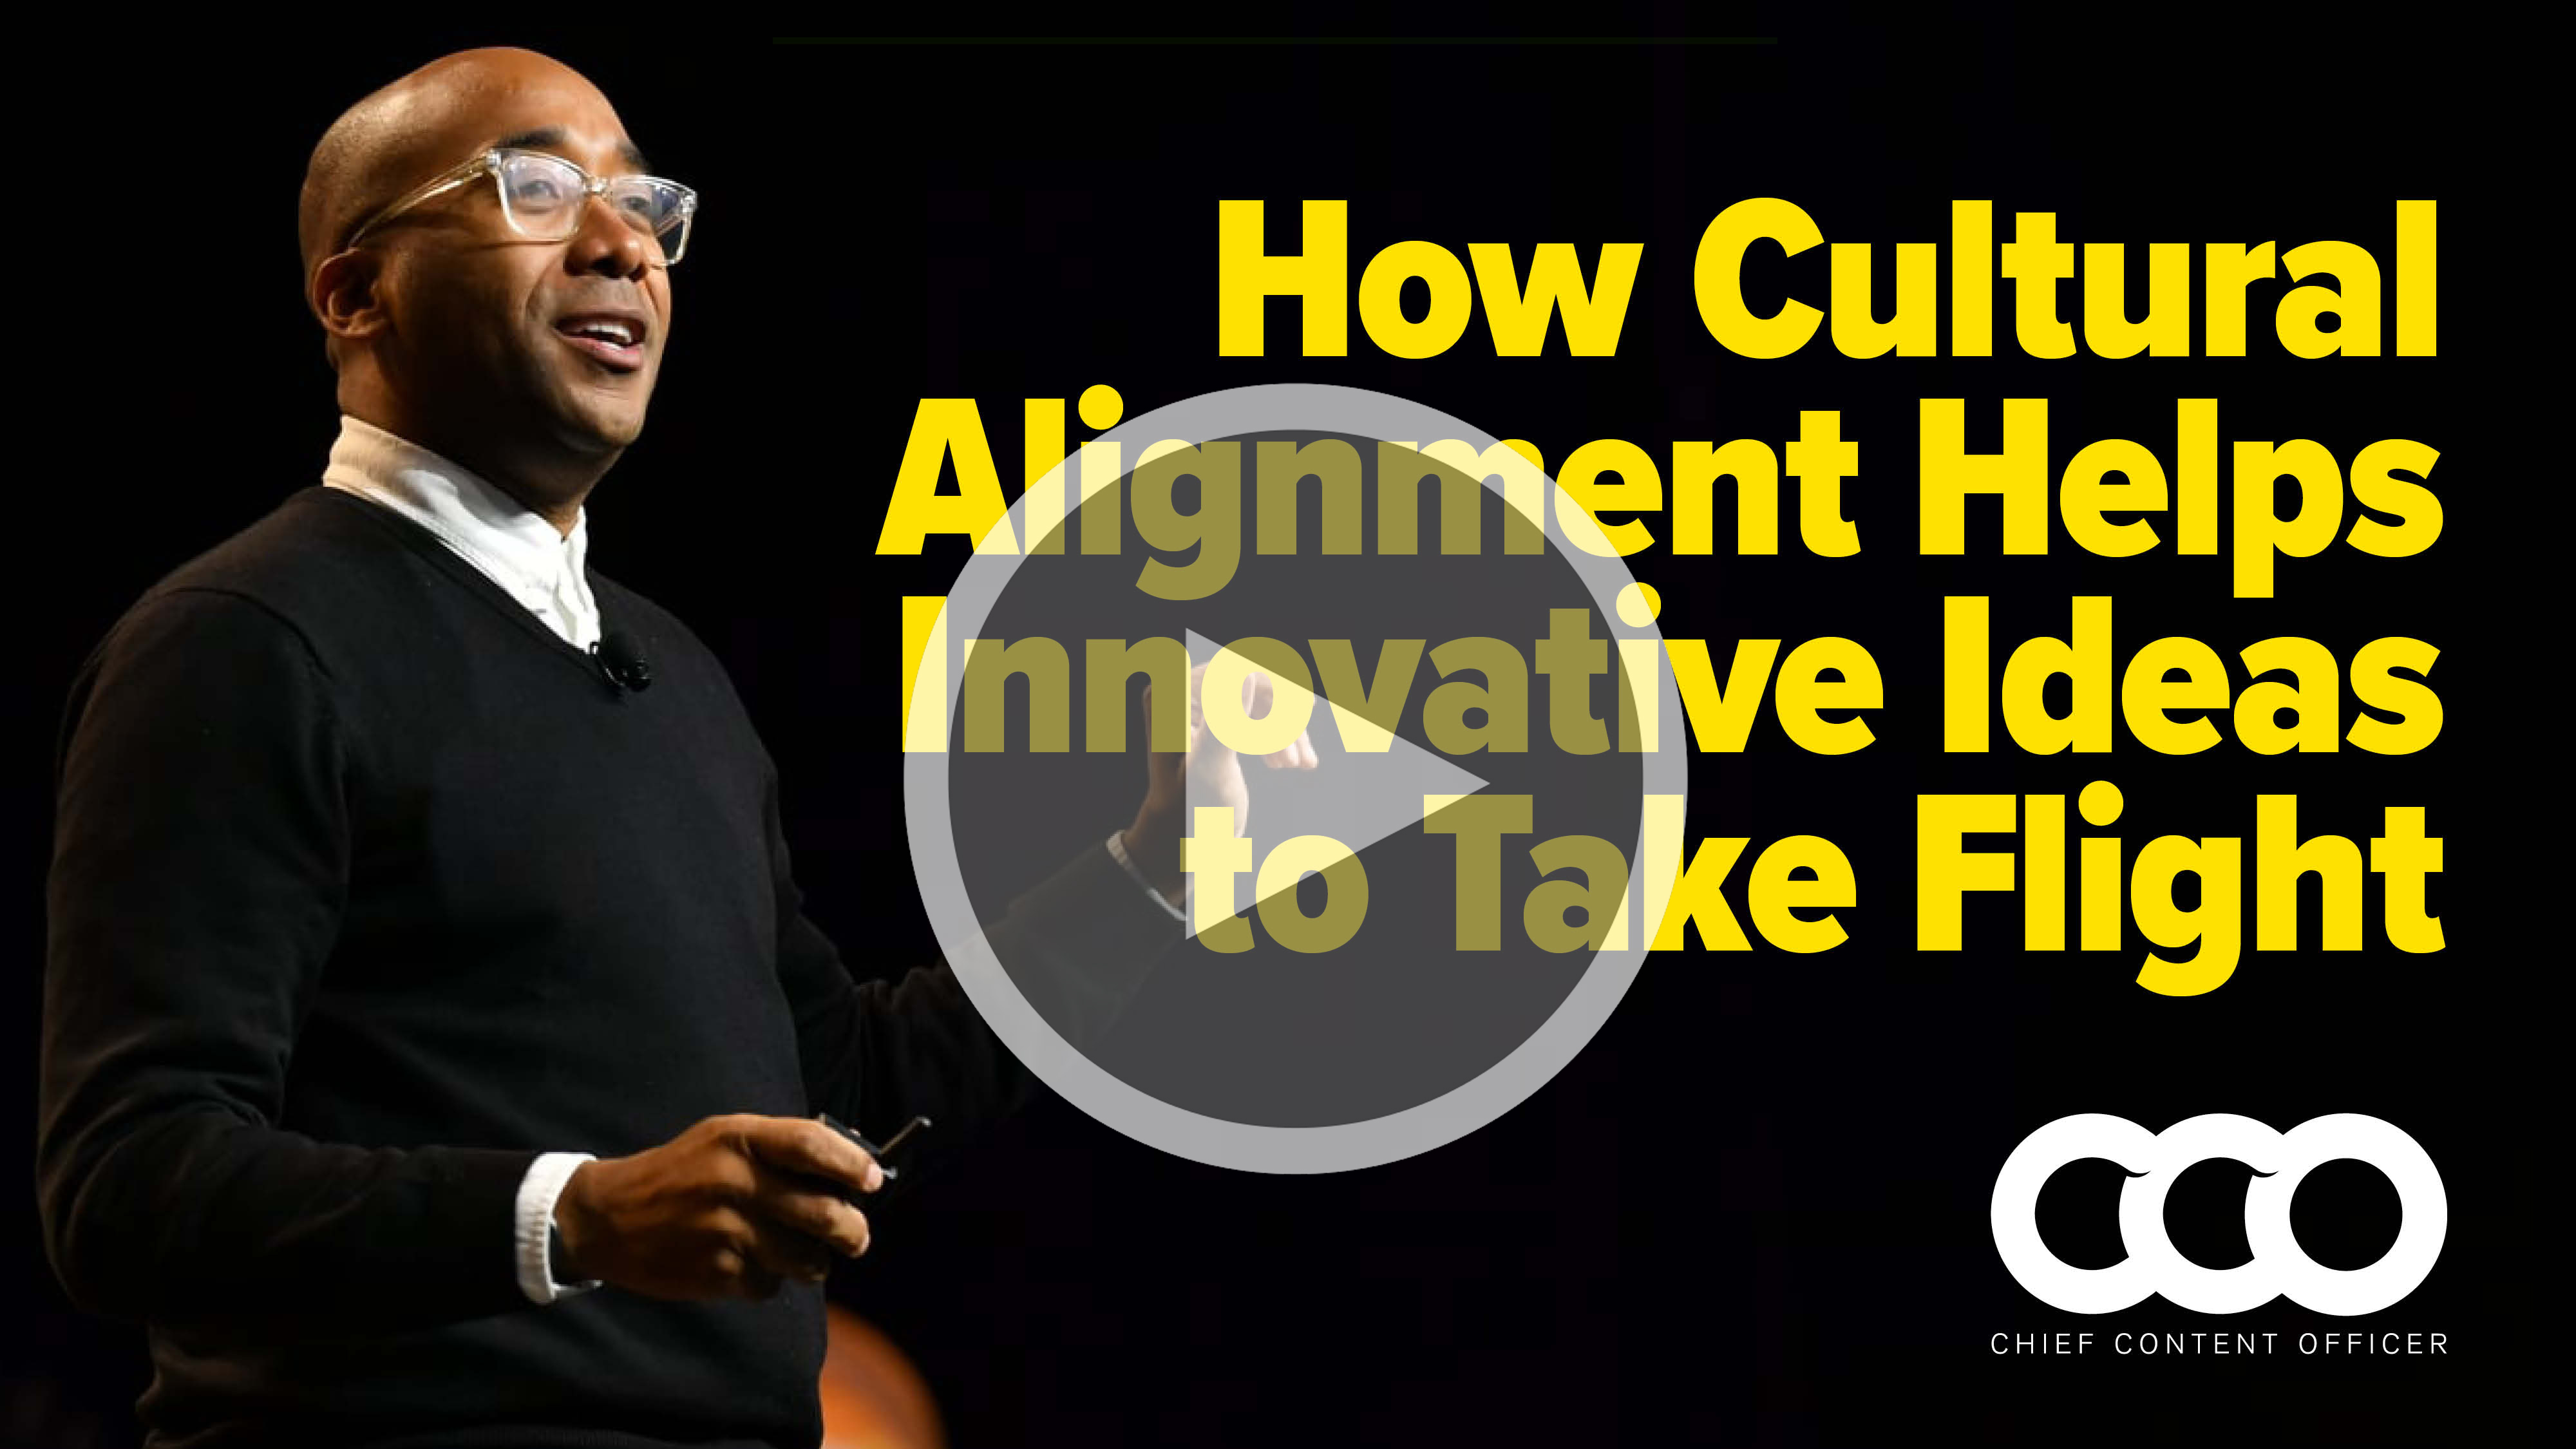 Marcus Collins Video: How Cultural Alignment Helps Innovative Ideas Take Flight